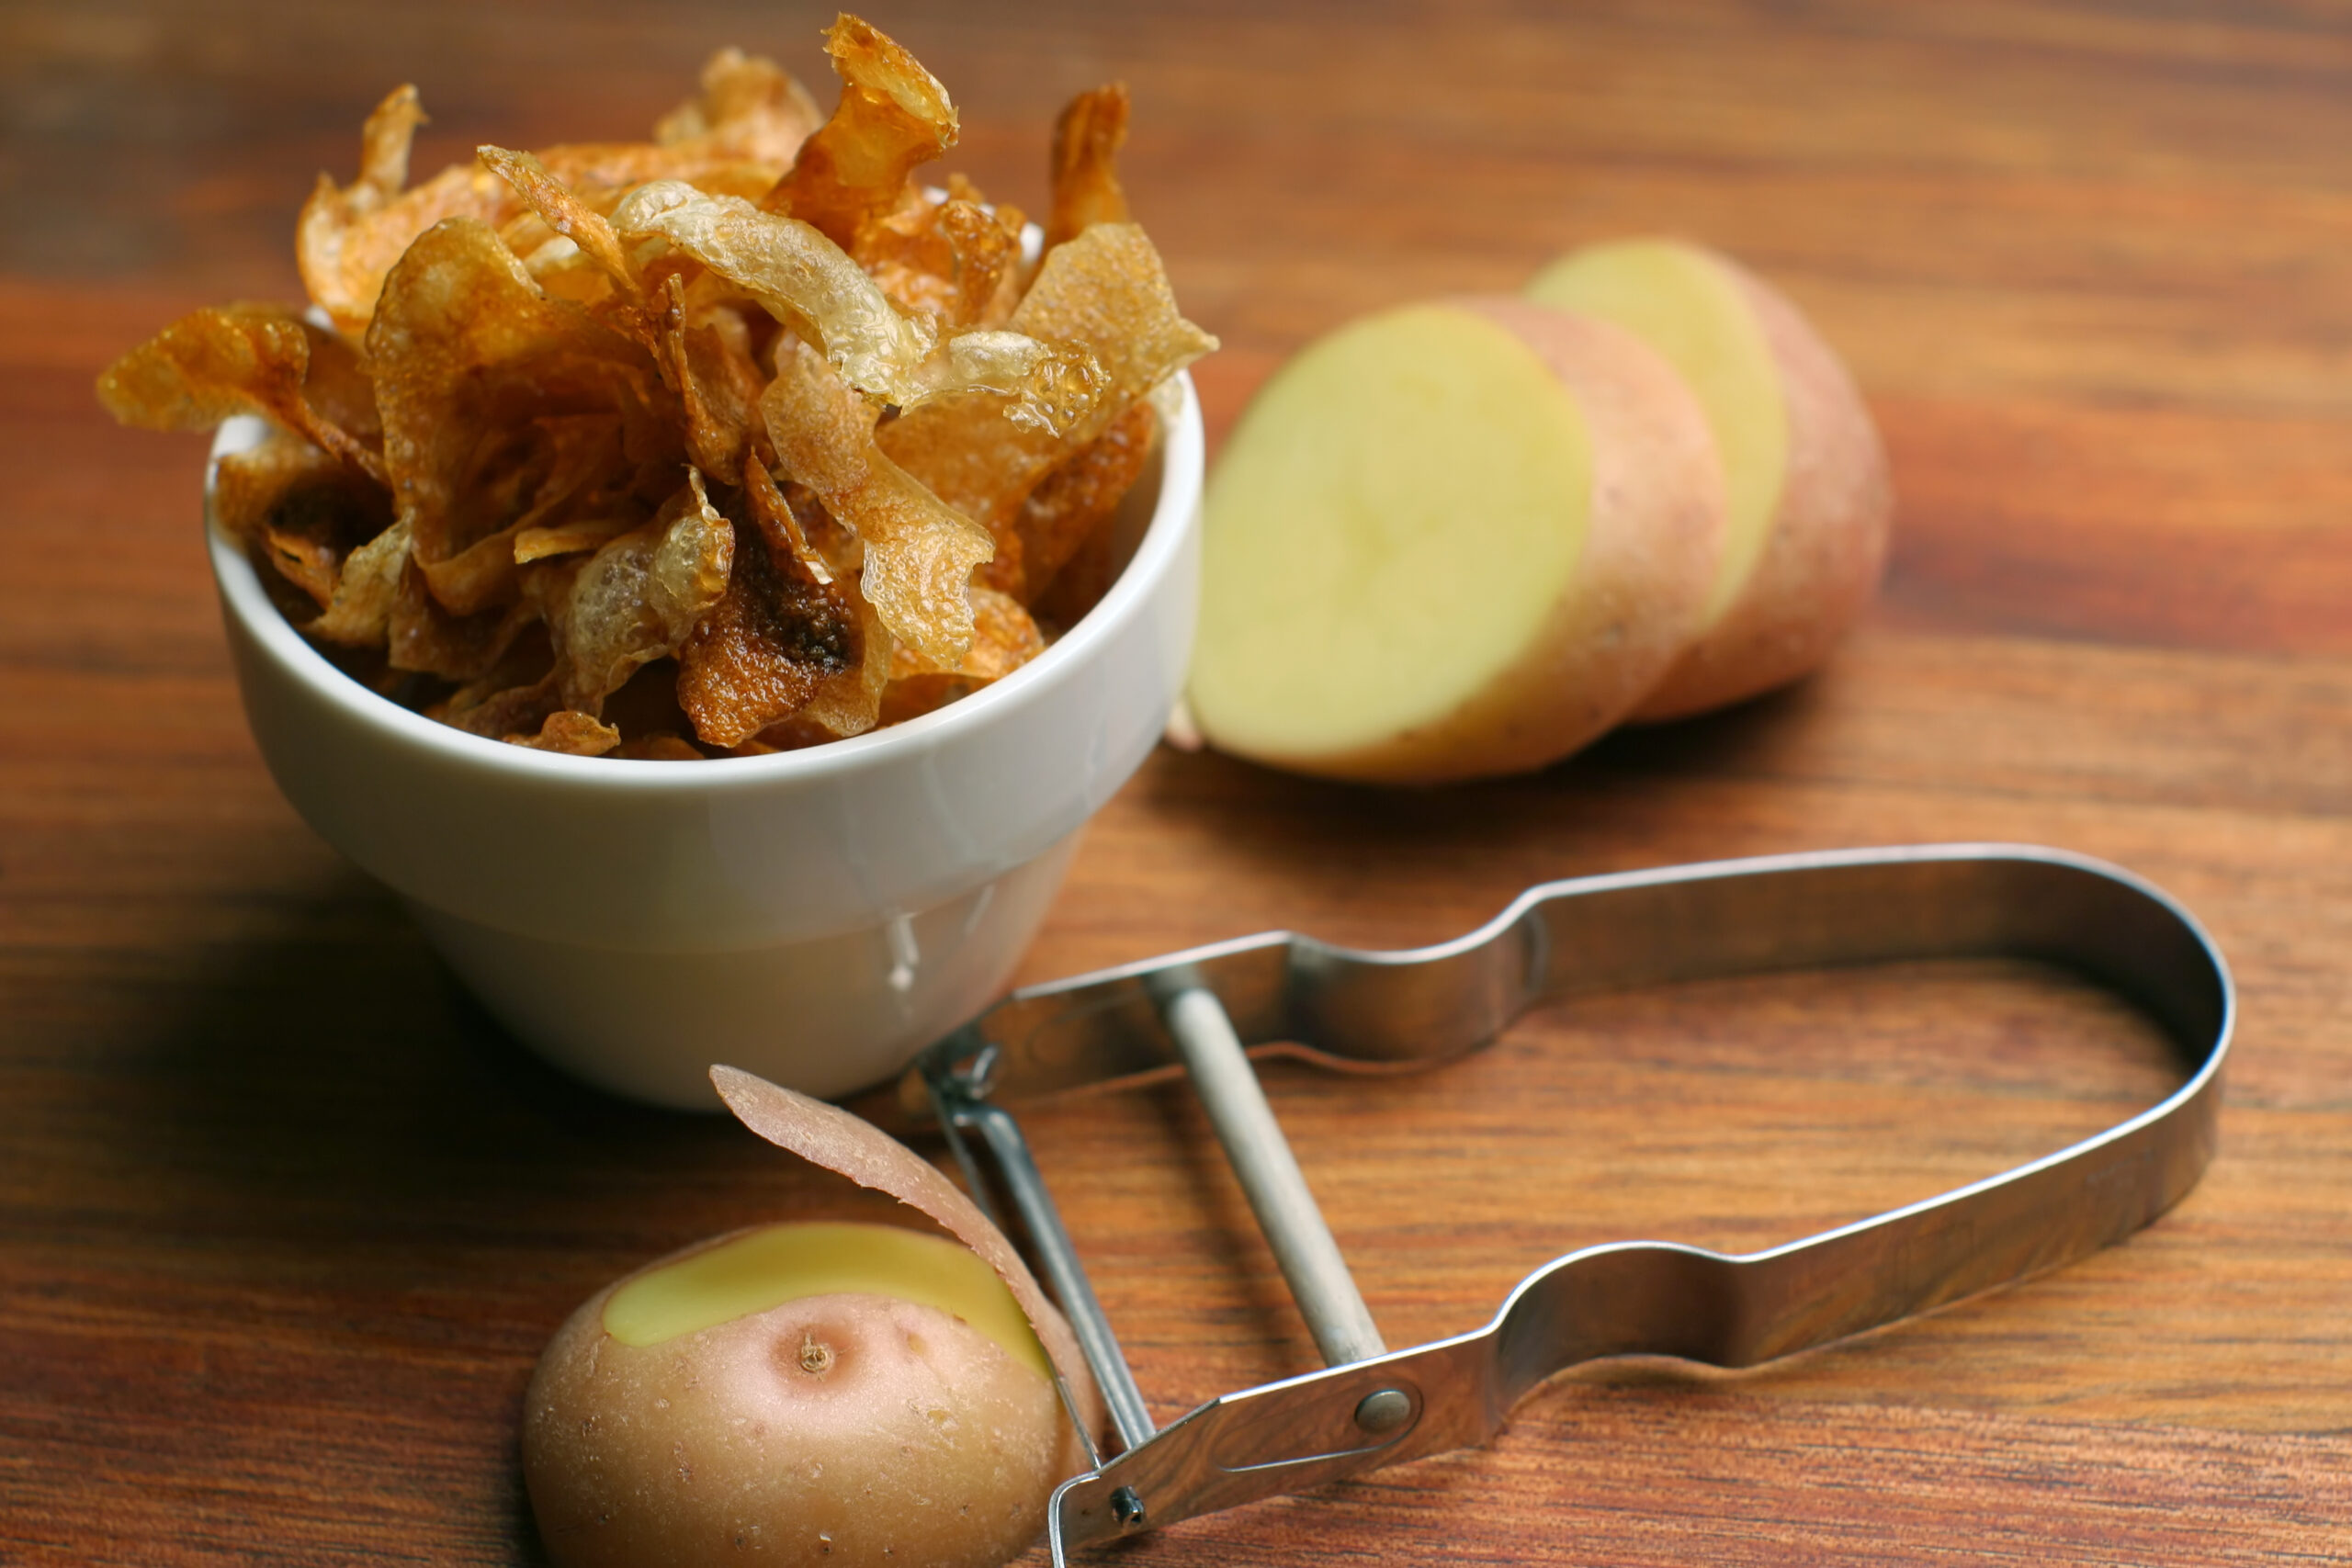 Crispy Oven-Roasted Potato Peels served in a white ceramic bowl, on wooden chopping block with peeler and potato.